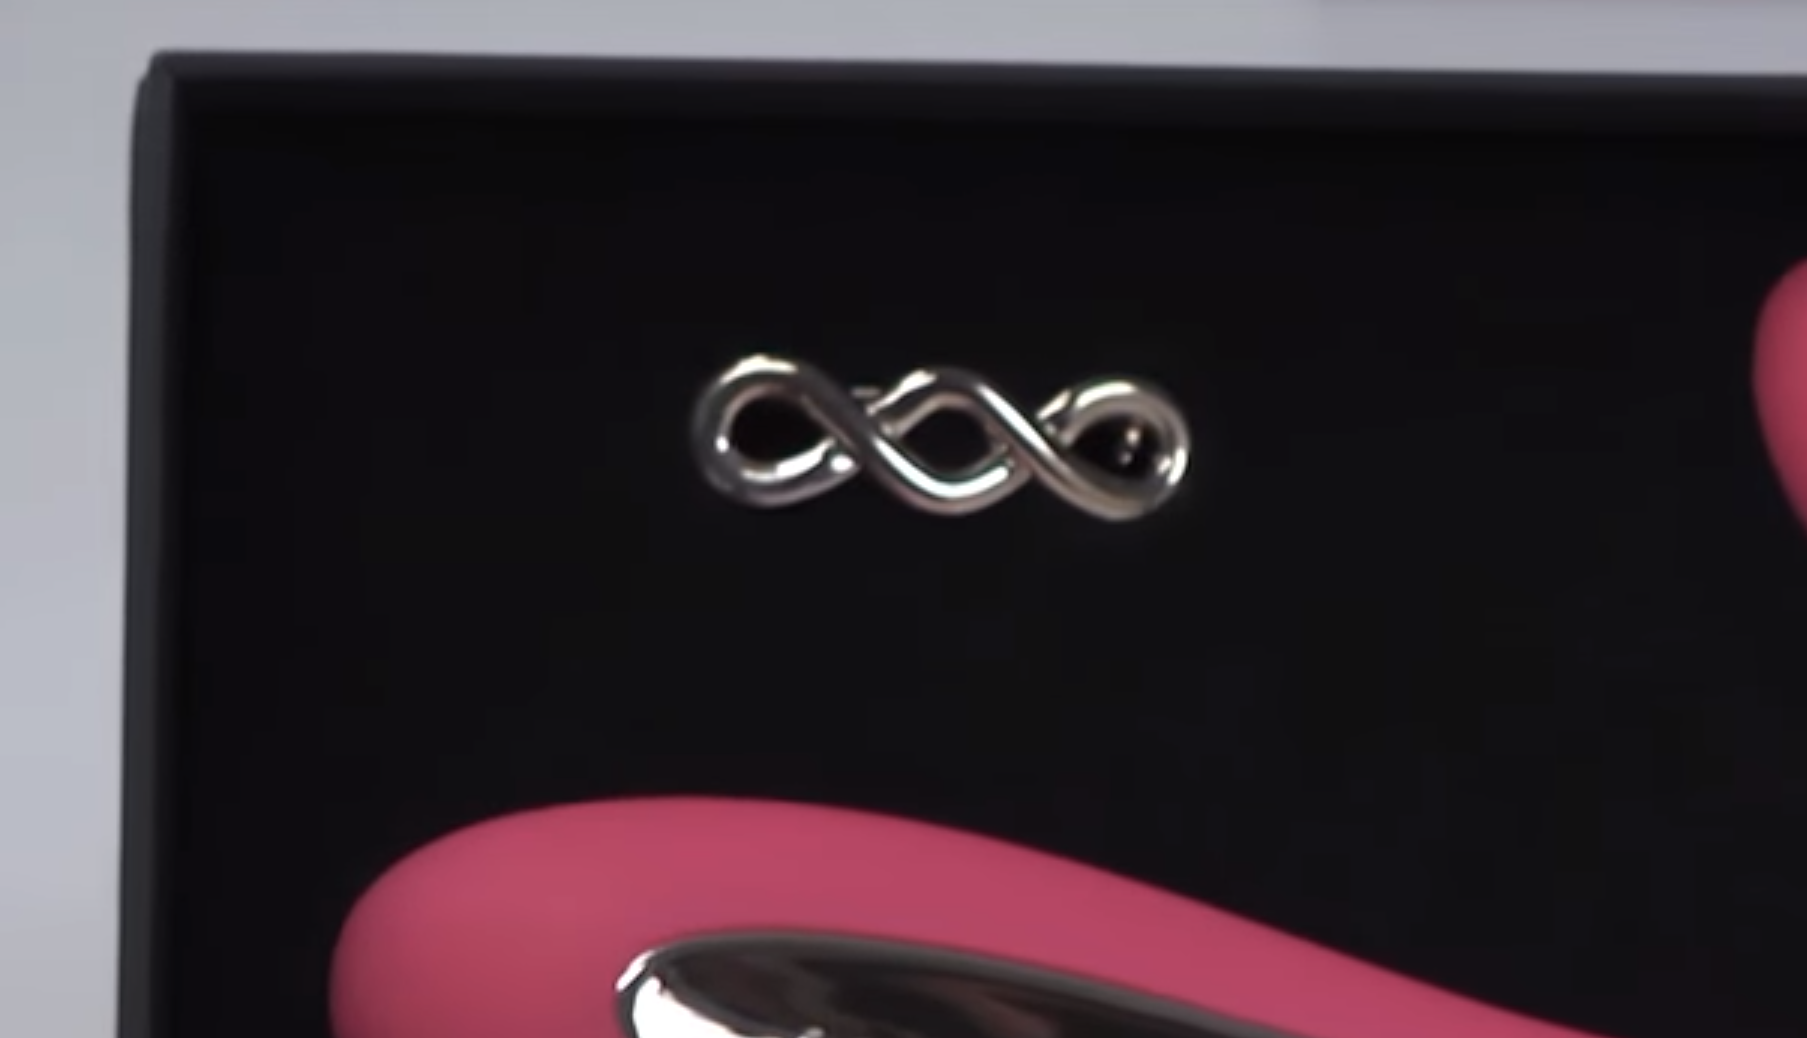 The brooch included in the box